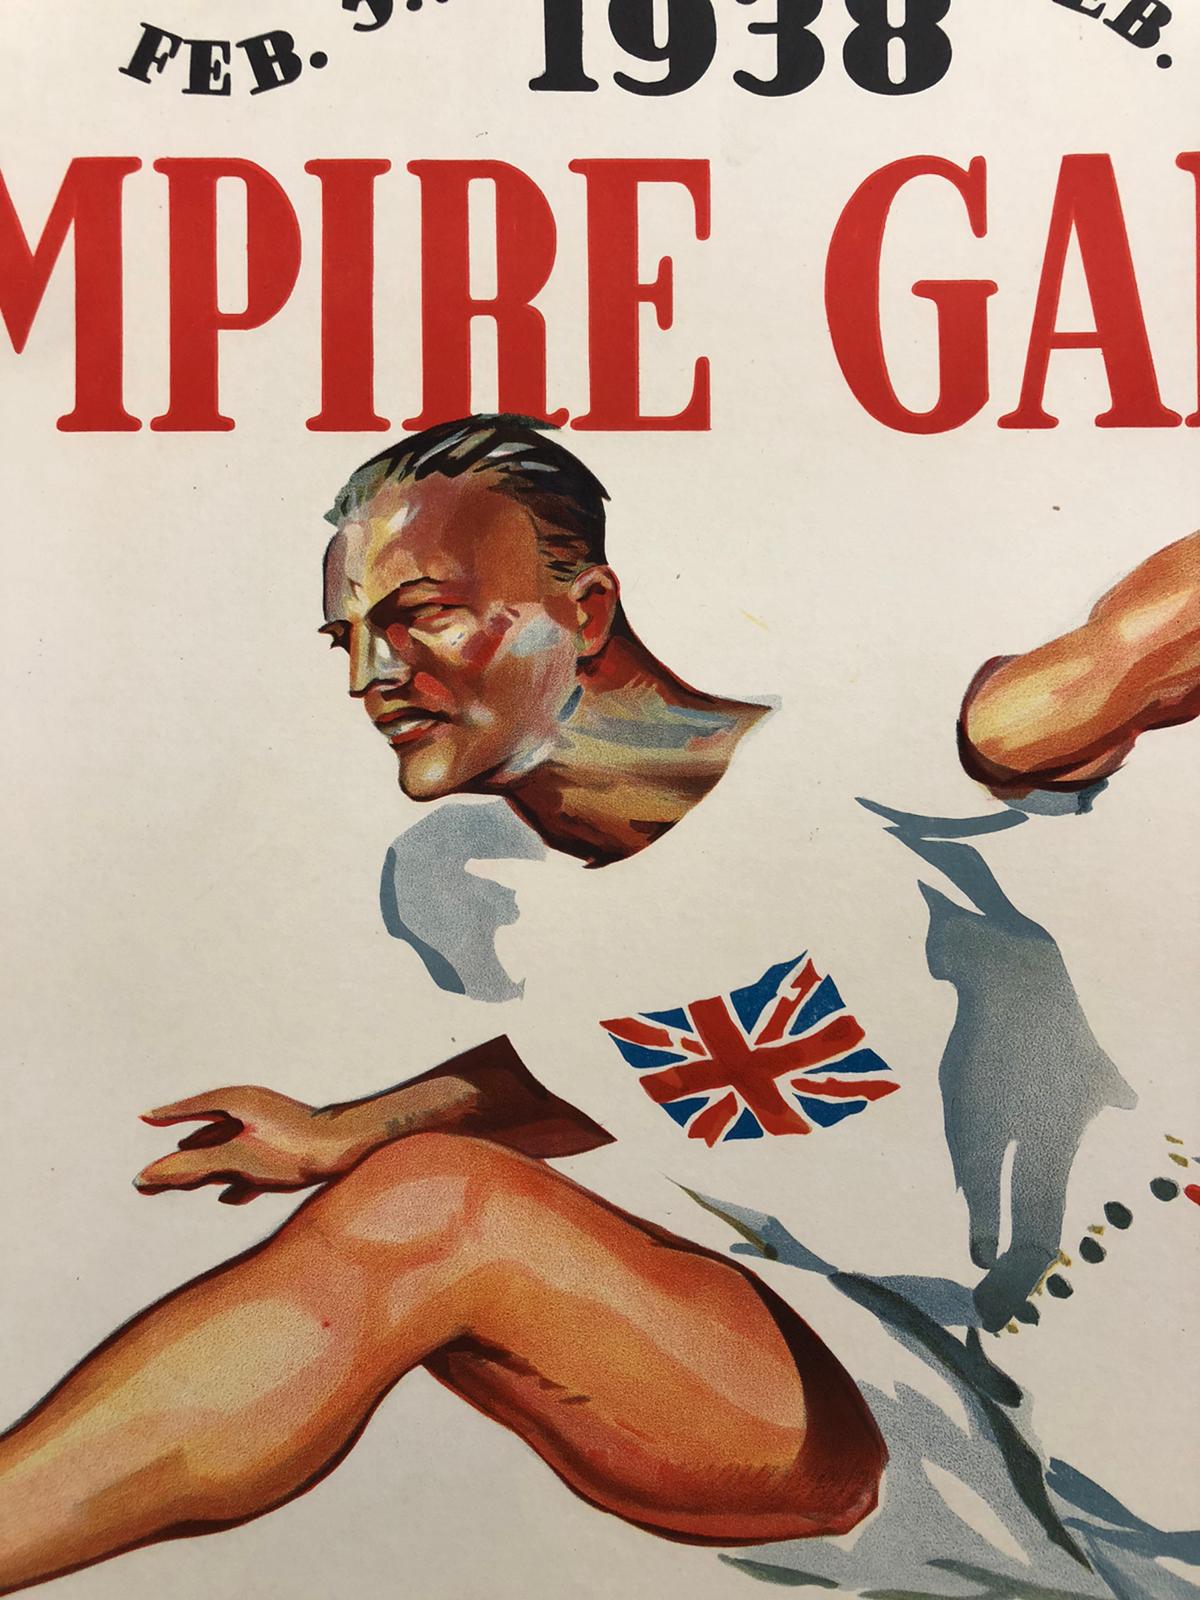 Sydney Empire Games 1938 by Charles Meere